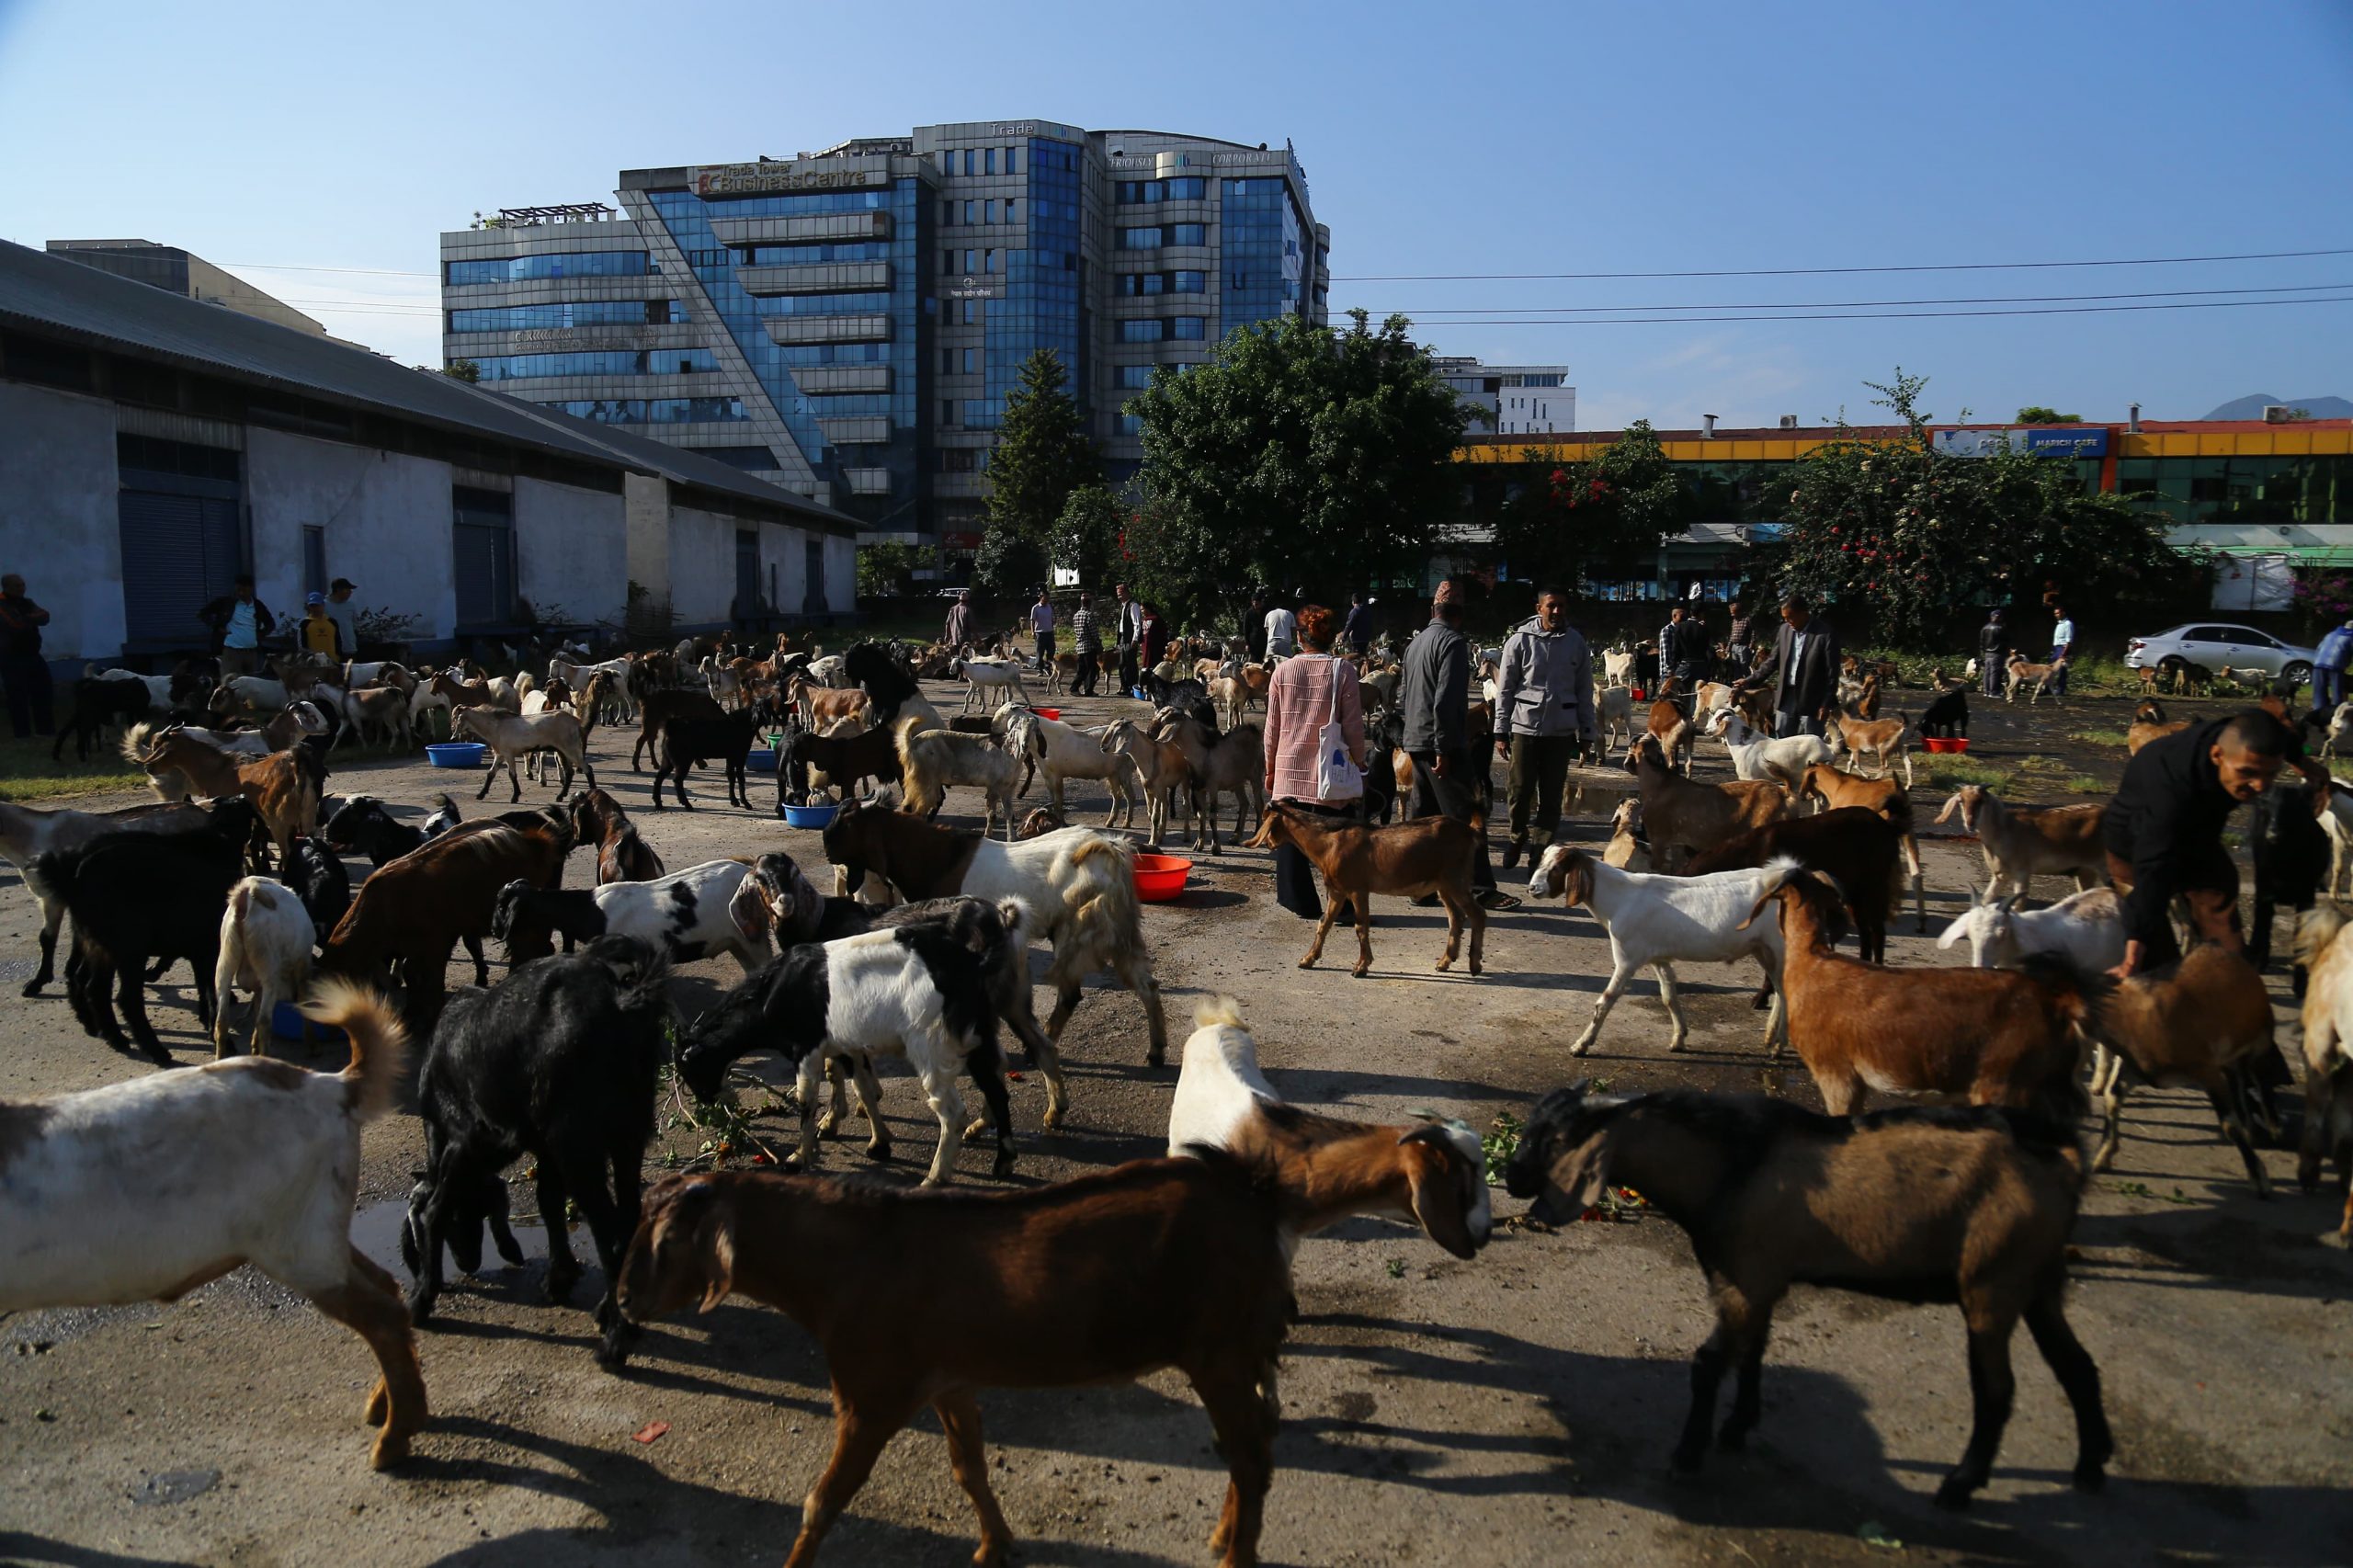 Buying/selling of goats and chyangra for Dashain begins (photos)